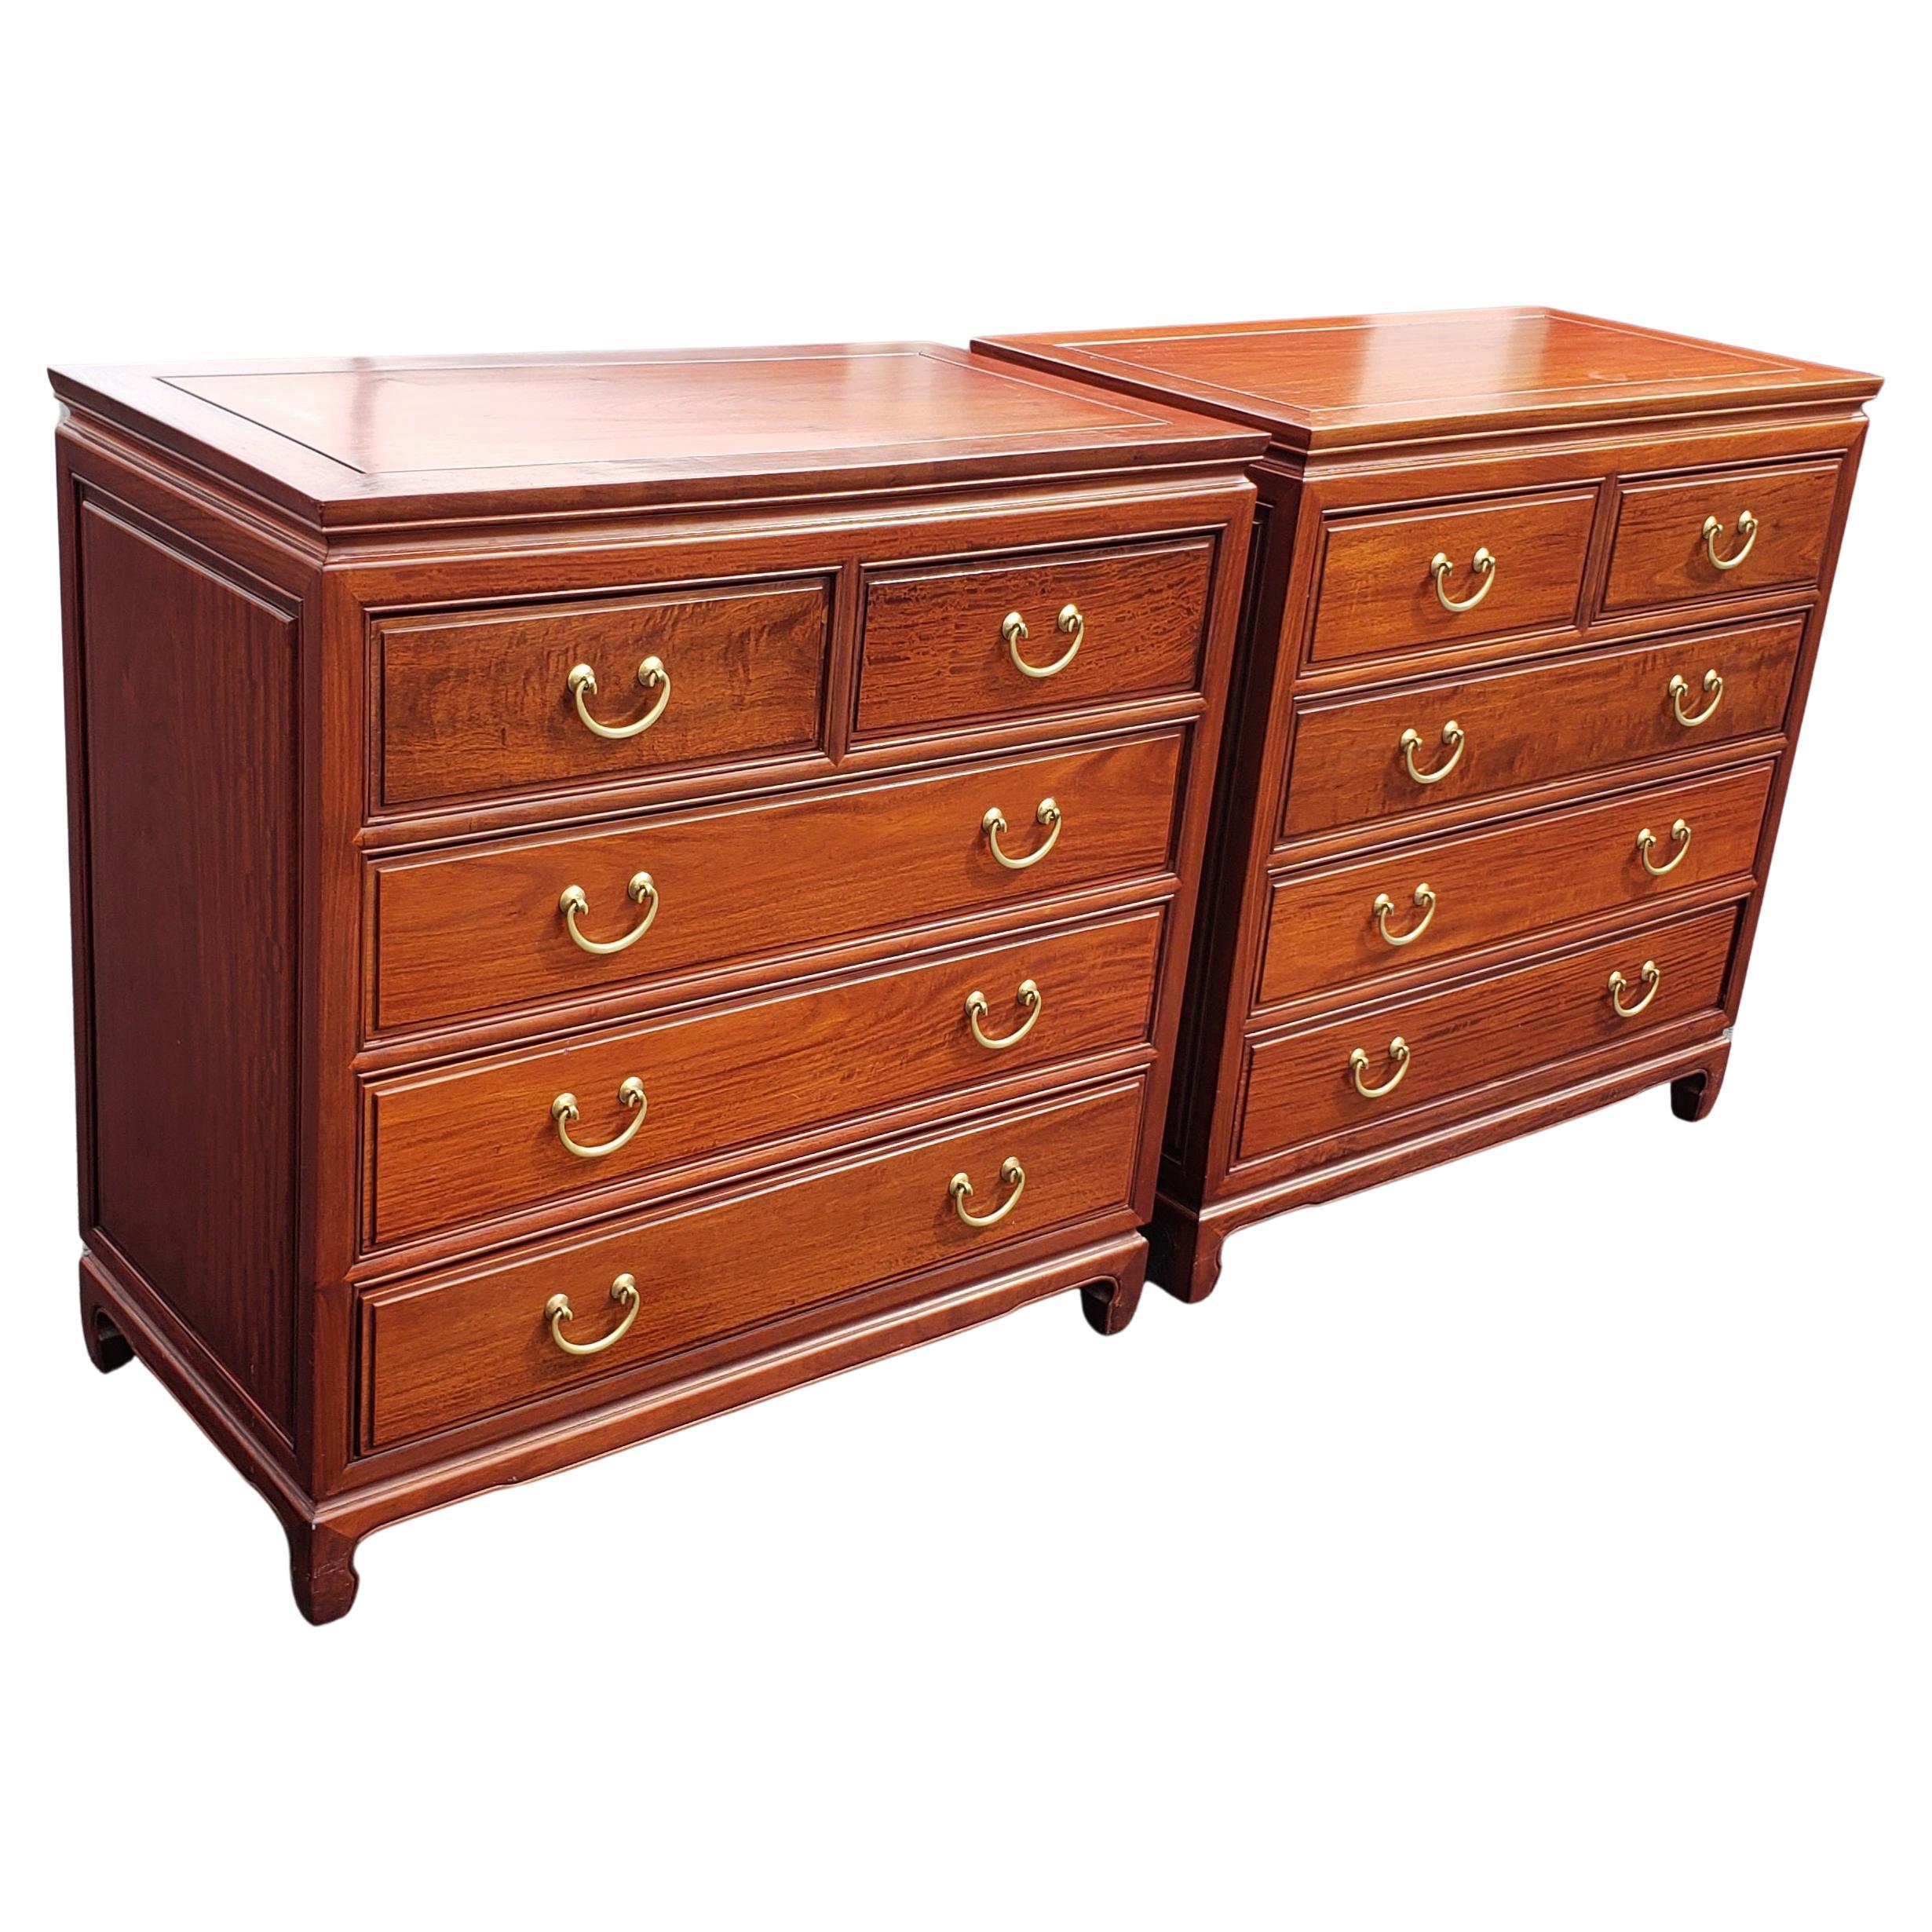 4 chest of drawers